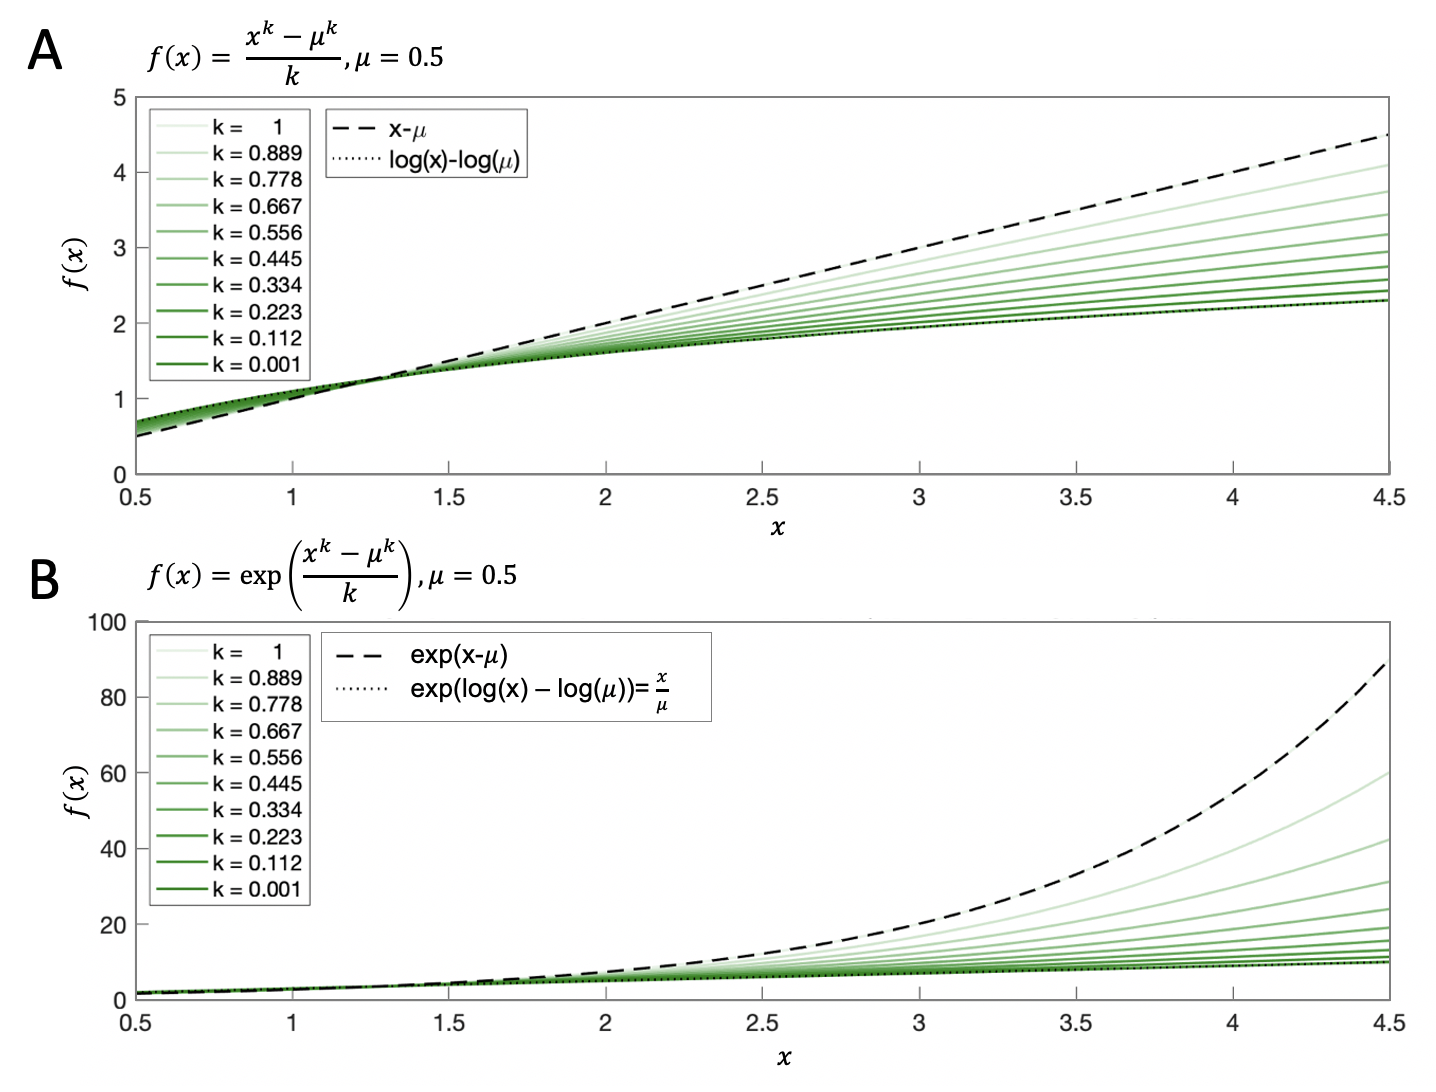 Illustration of variations in parameter $k$. $\textbf{A:}$ Using parameter $k$ to interpolate between a linear expression and its logarithmic compression. Note that the darkest green curve ($k=0.001$) lies on the dotted line (logarithmic expression), suggesting that implementing a value of $k$ as high as 0.001 satisfactorily approximates the natural logarithm. $\textbf{B:}$ Exponentiating the function from panel A,  as in the logistic formulation of the grandmother model. Note that the darkest green curve ($k=0.001$) lies on the dotted line (linear expression, $\exp(\log(x)-\log(\mu))=\frac{x}{\mu}$). This demonstrates that we can recover both normalization models that rely on logistic compression and normalization models that do not.